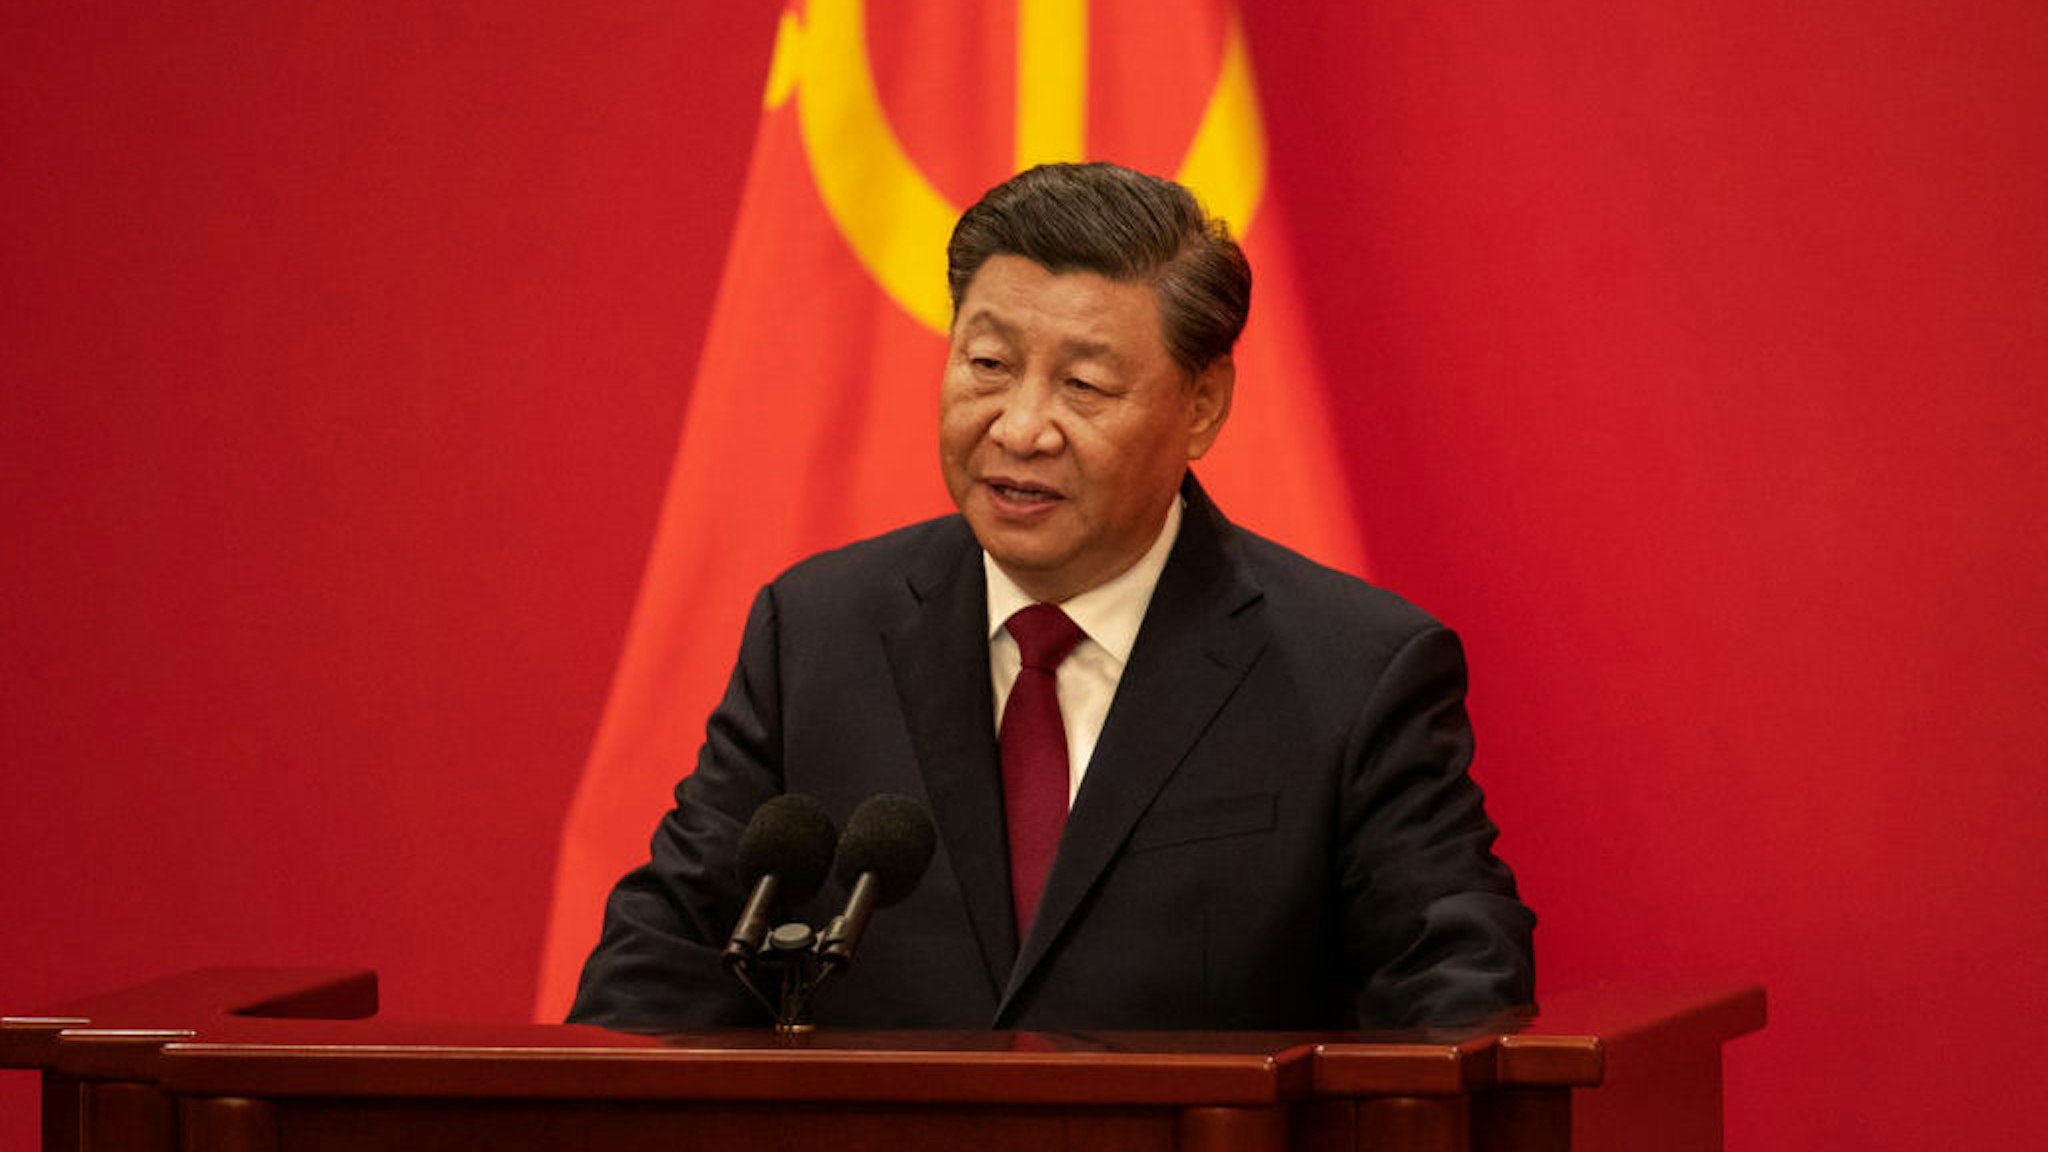 Xi Jinping, China's president, speaks during the unveiling of the Communist Party of China's new Politburo Standing Committee at the Great Hall of the People in Beijing, China, on Sunday, Oct. 23, 2022. President Xi Jinping stacked China's most powerful body with his allies, giving him unfettered control over the world's second-largest economy. Source: Bloomberg